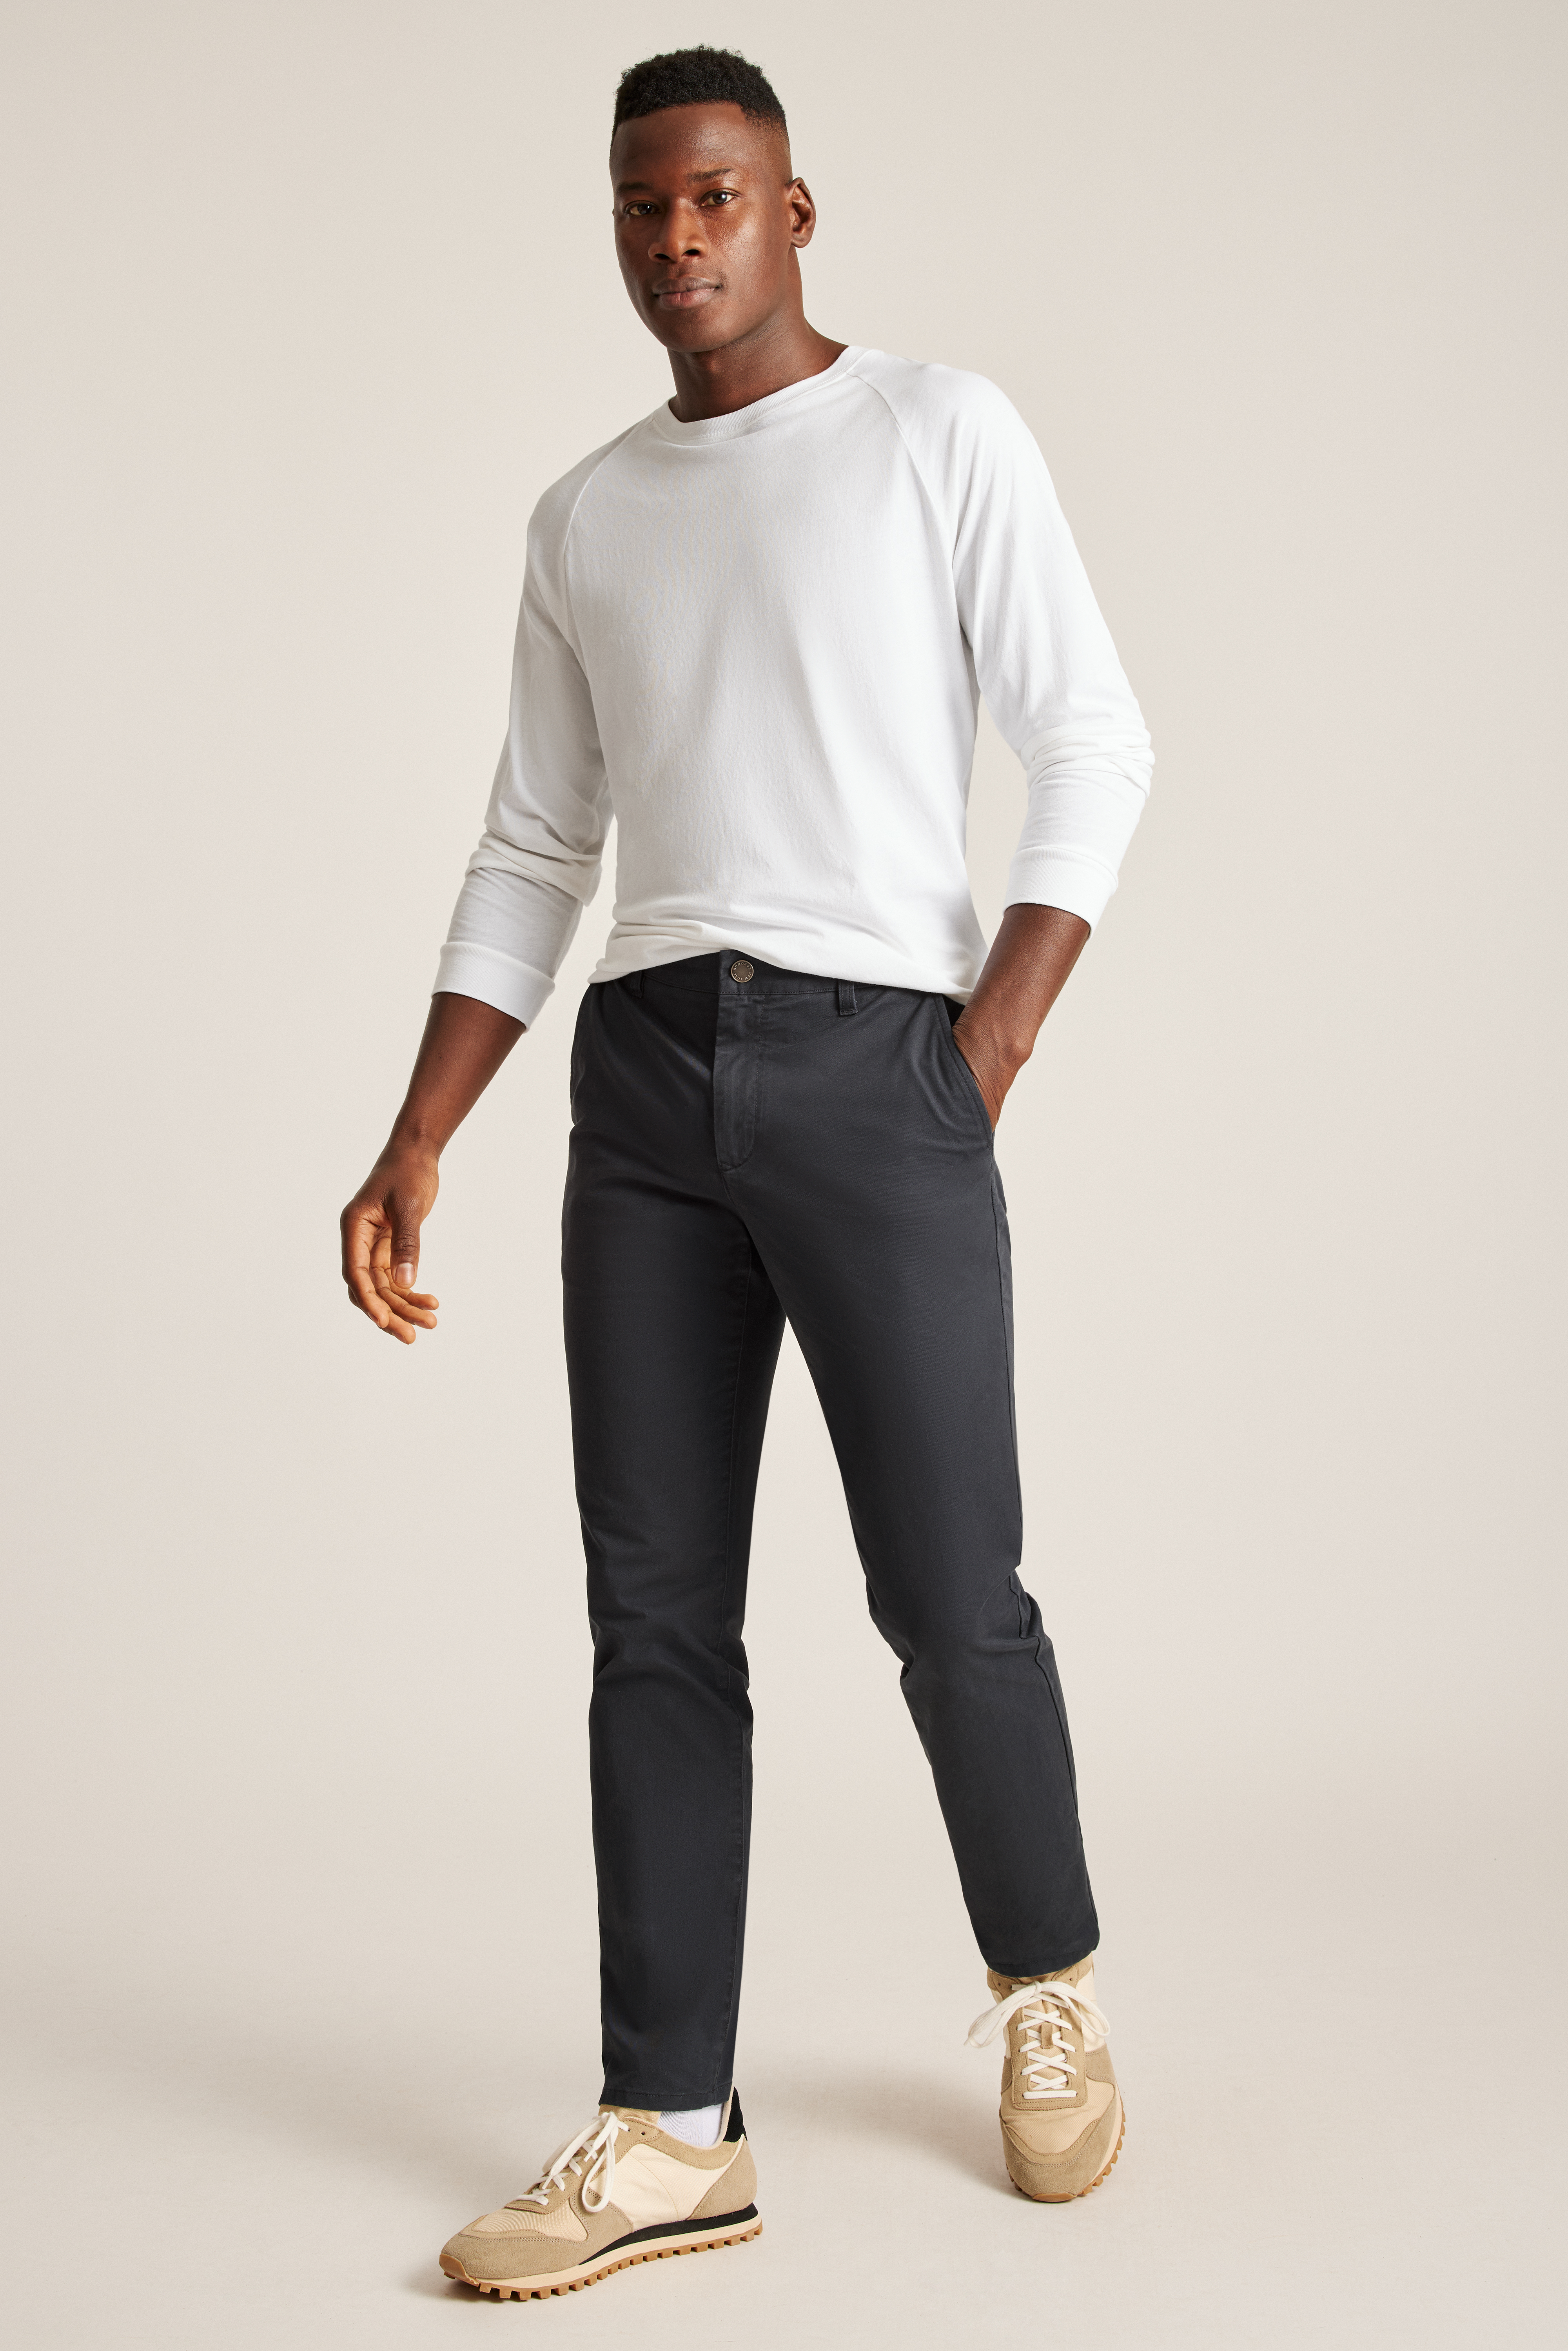 Brenta Charcoal Brushed Stretch Cotton Chino - Custom Fit Pants